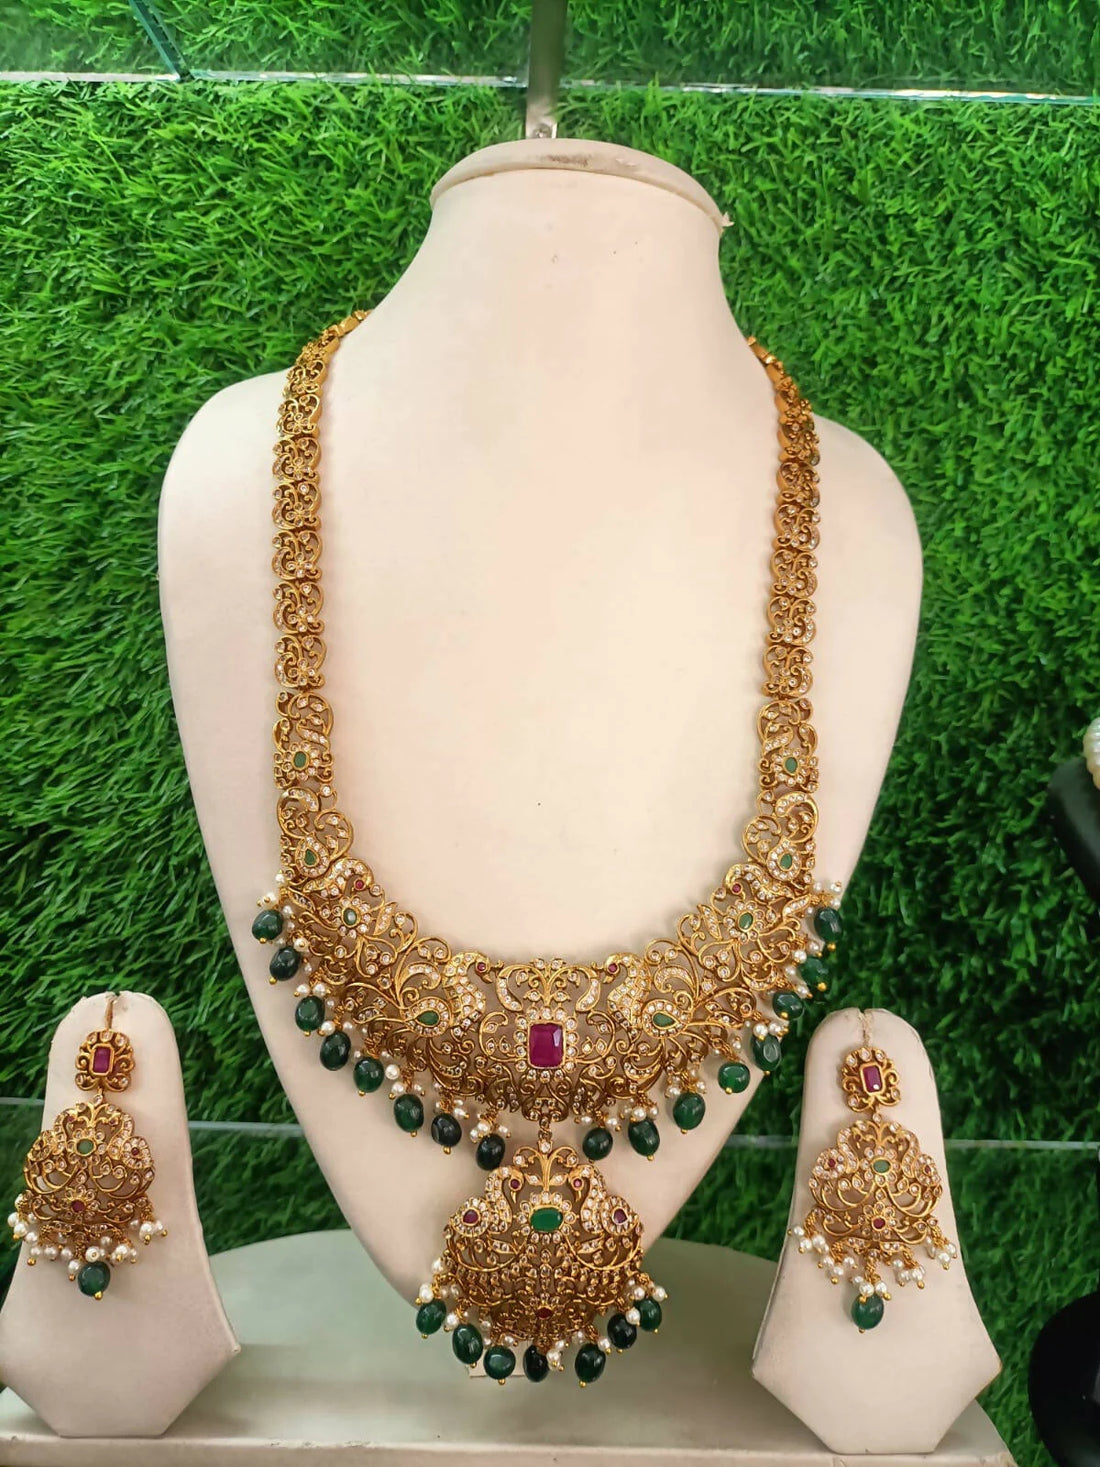 The Timeless Elegance of Traditional Jewelry Sets